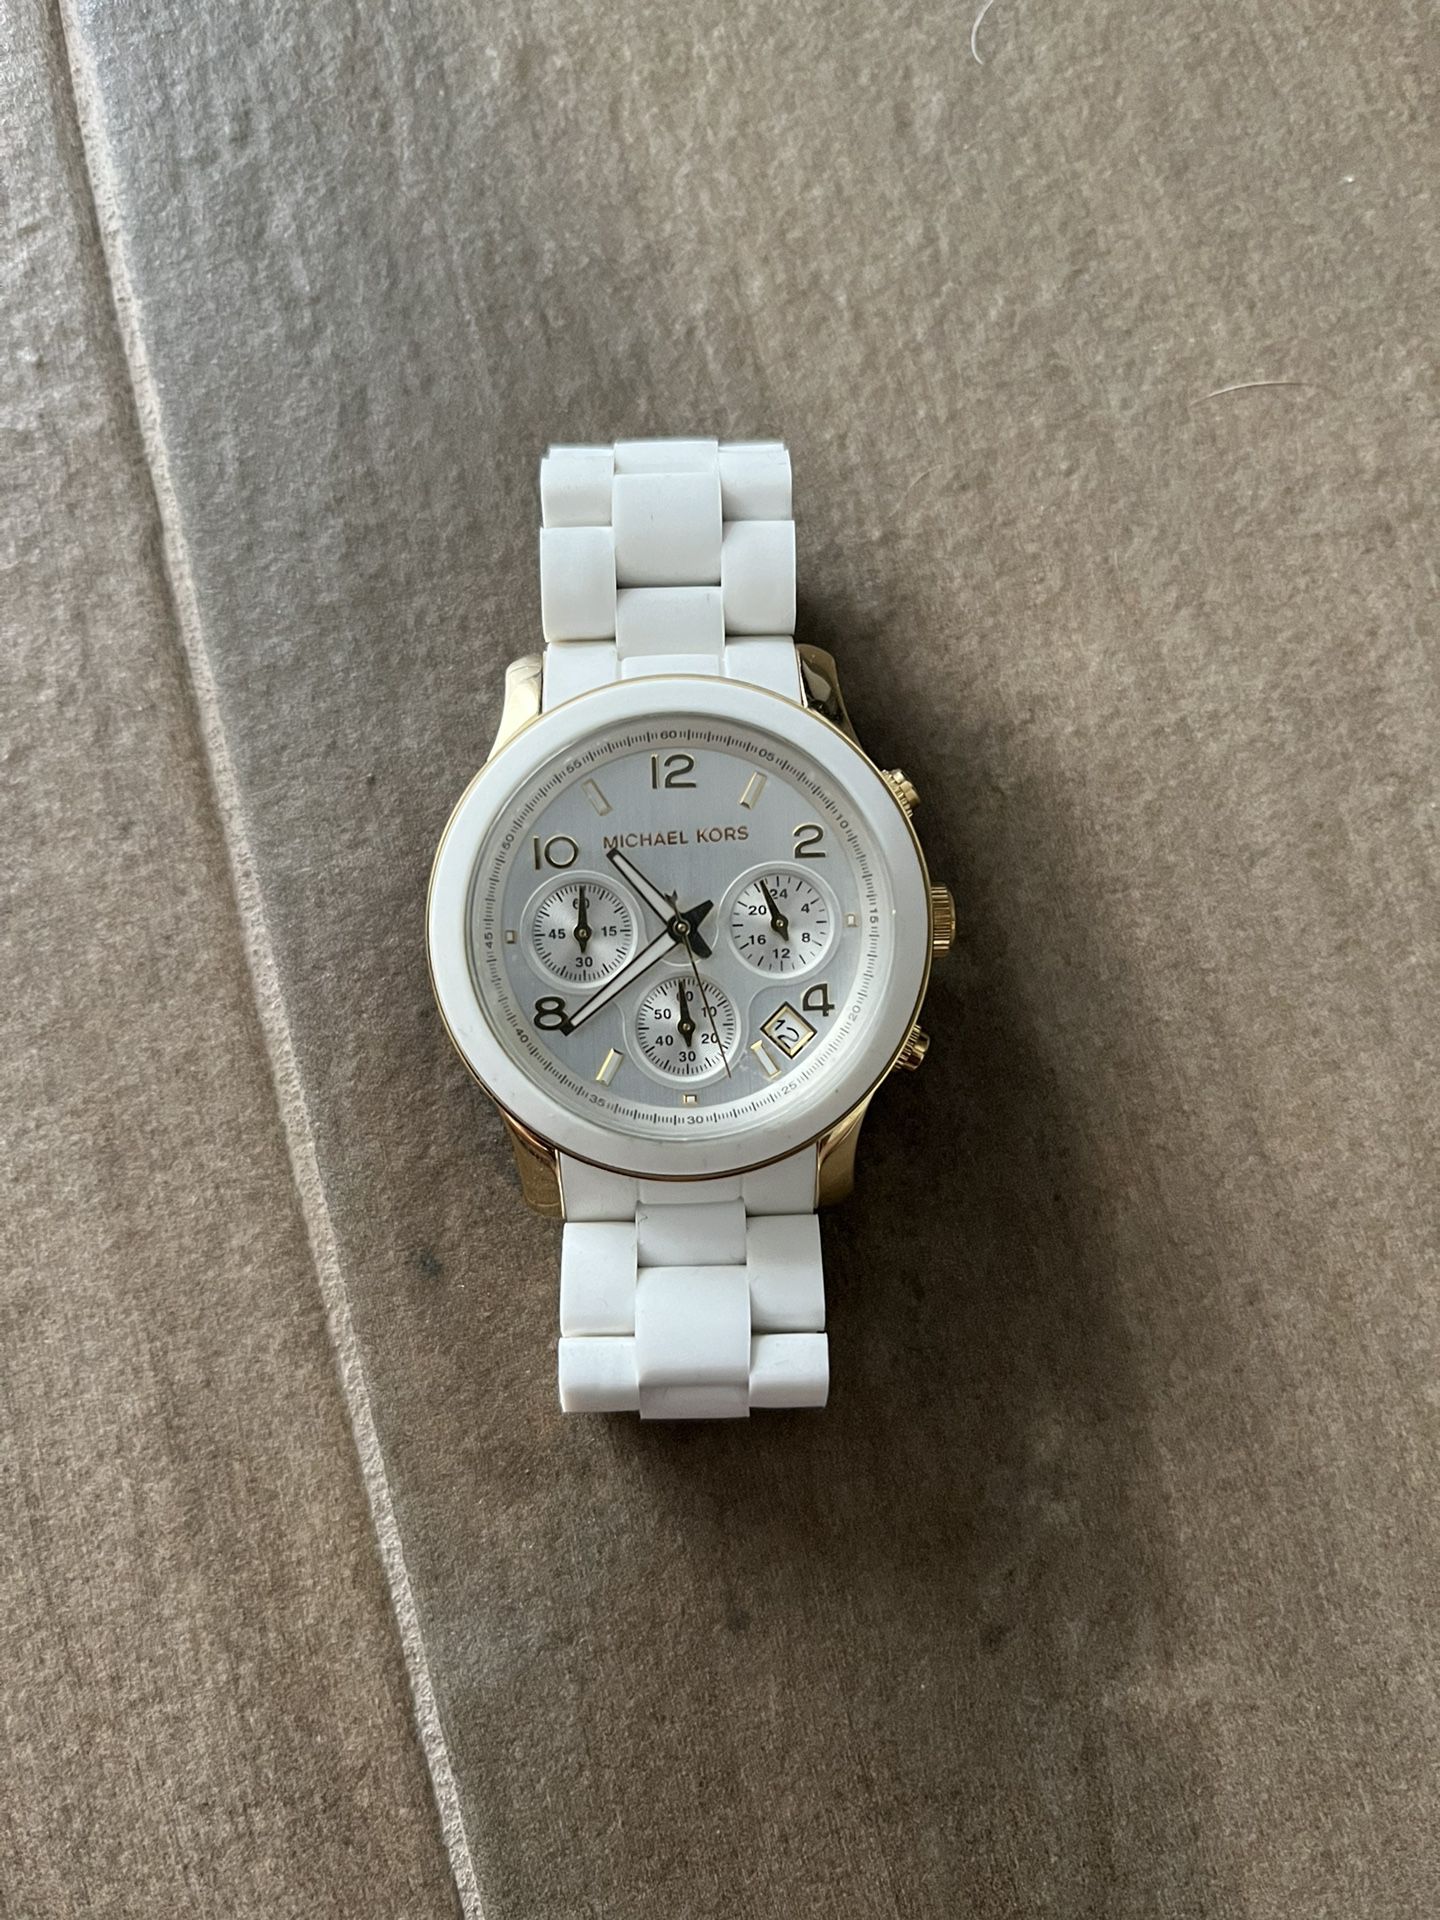 Authentic White With Gold Michael Kors Watch 